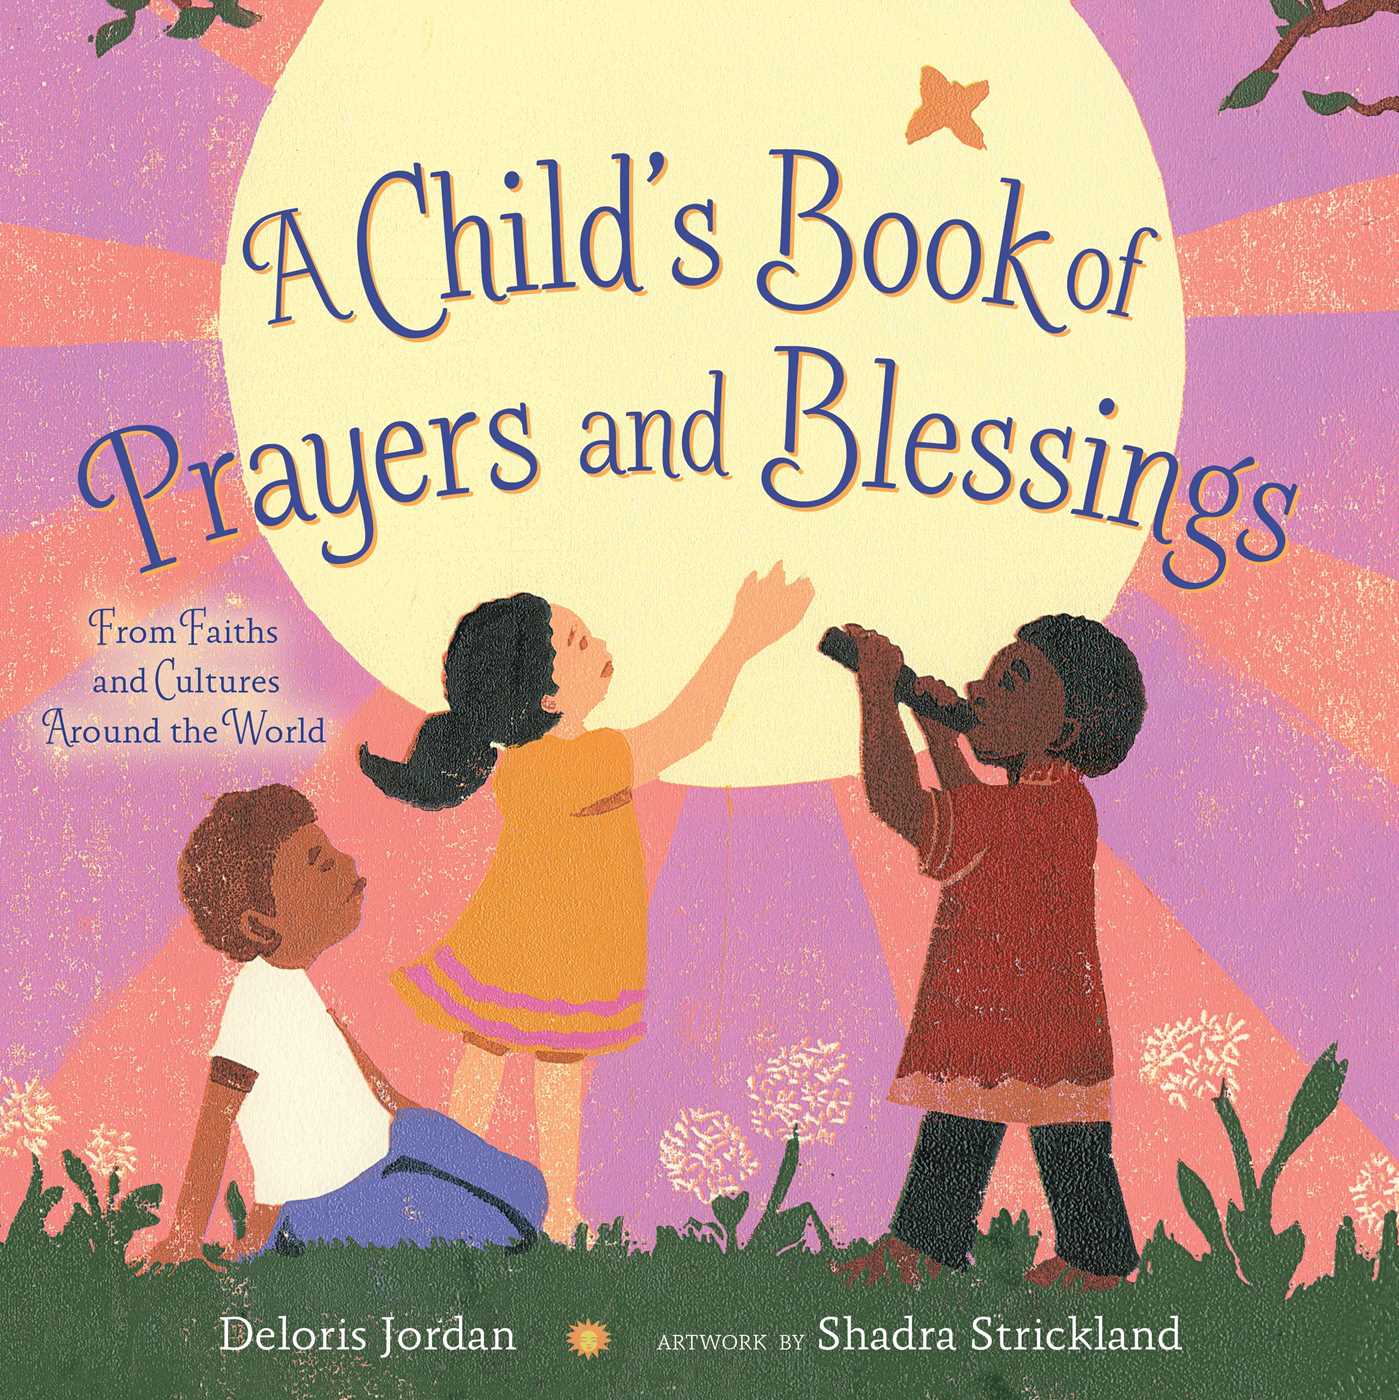 A Child's Book of Prayers and Blessings : From Faiths and Cultures Around the World